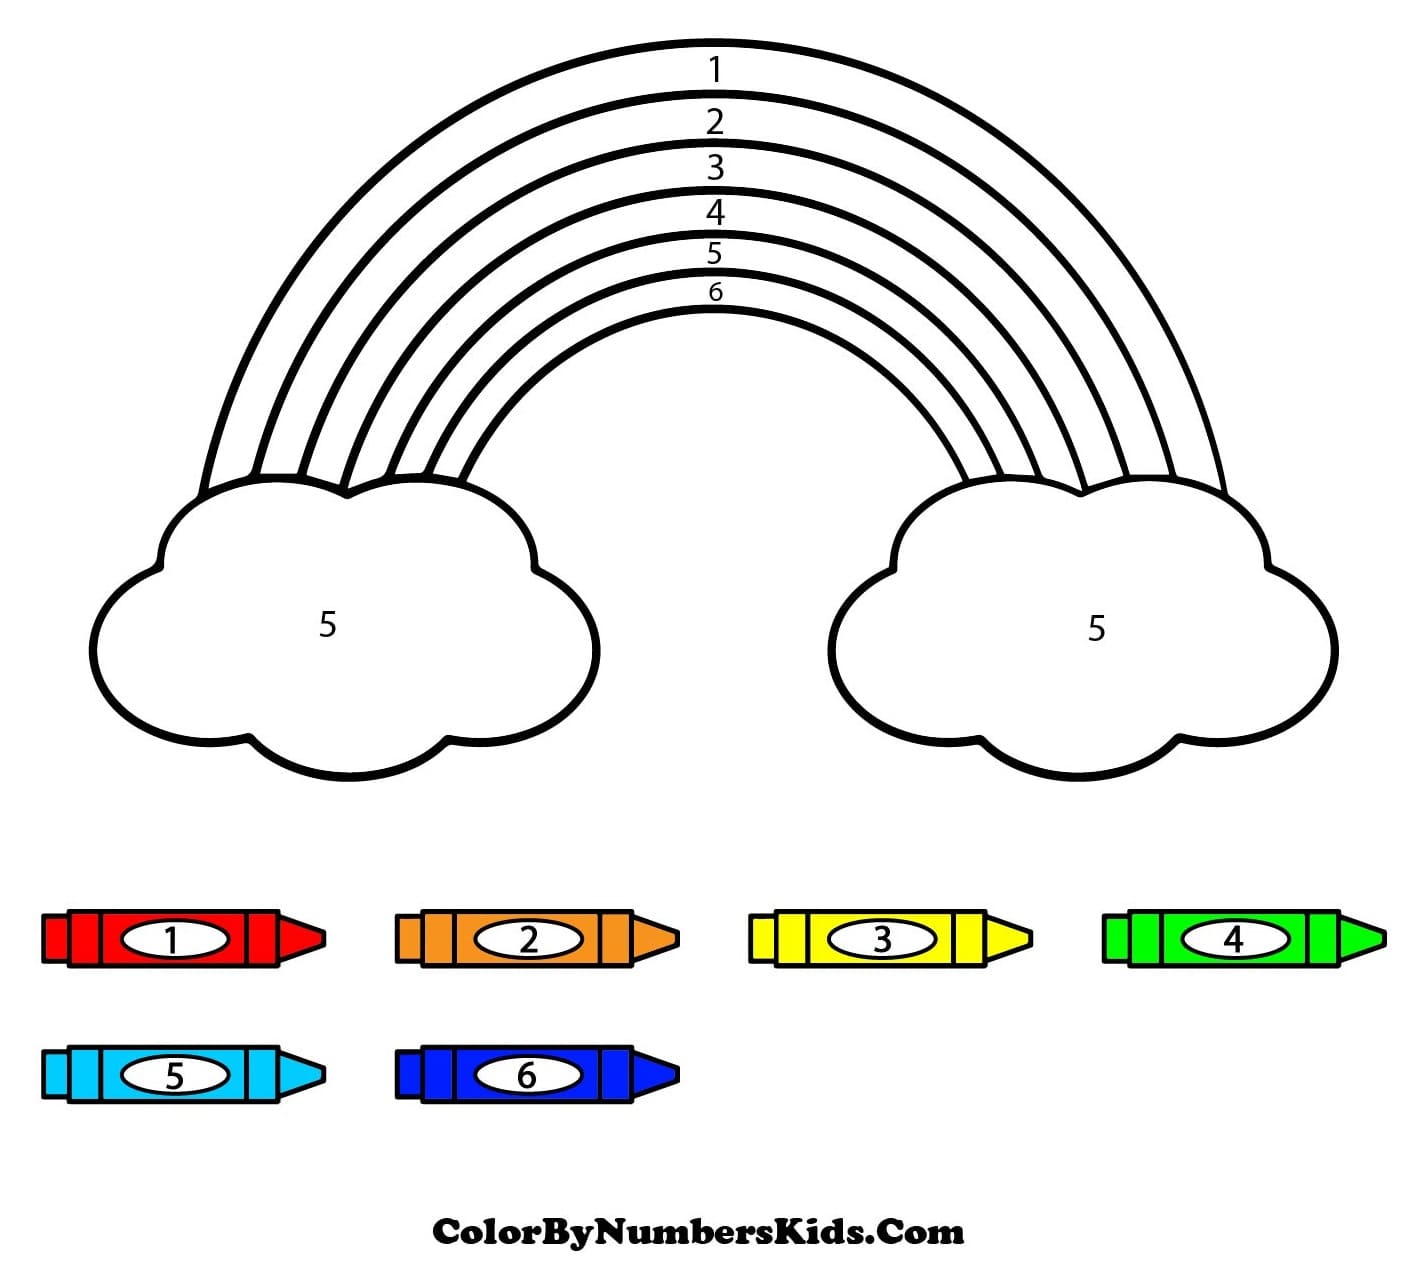 Basic Rainbow Color By Number